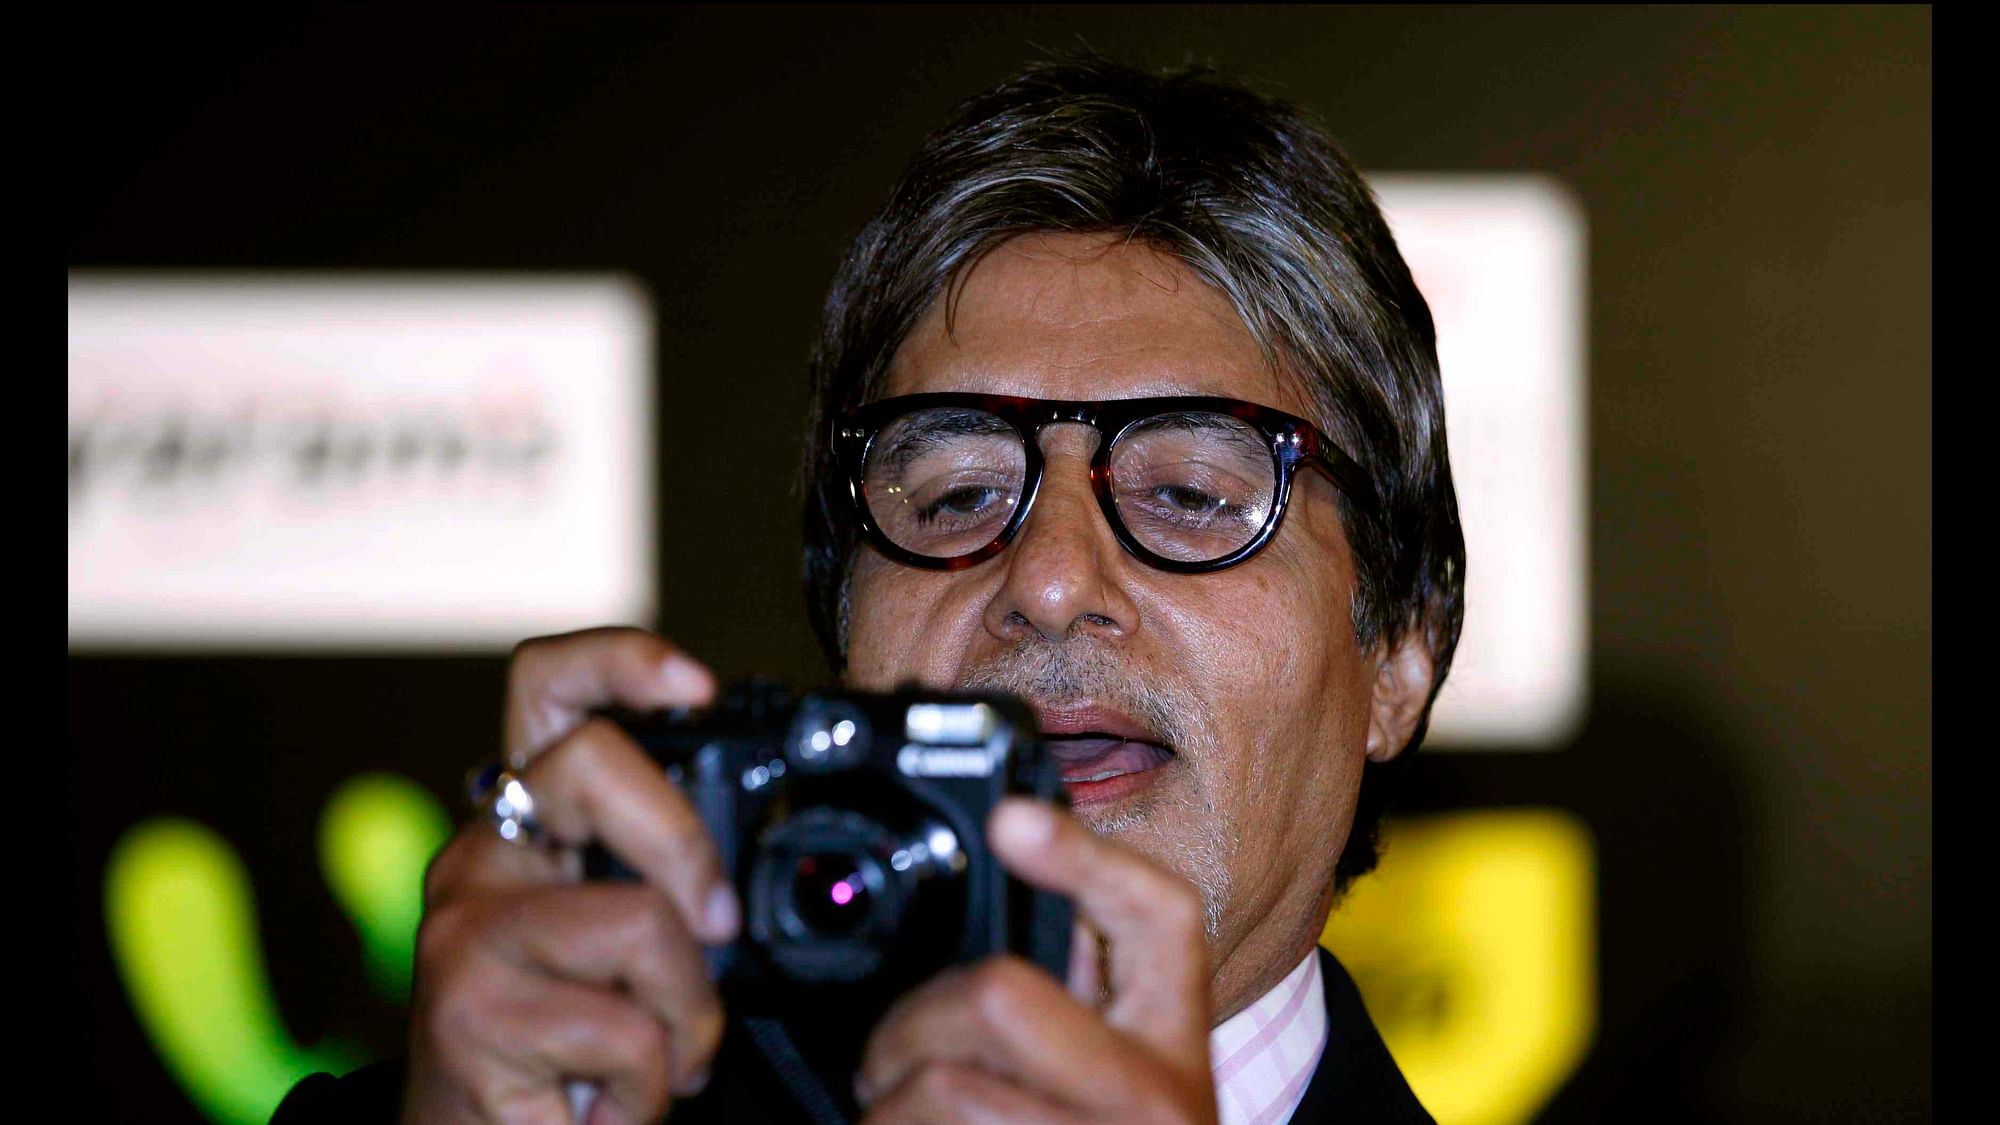 Amitabh Bachchan gets behind the camera at an awards event (Photo: Reuters)